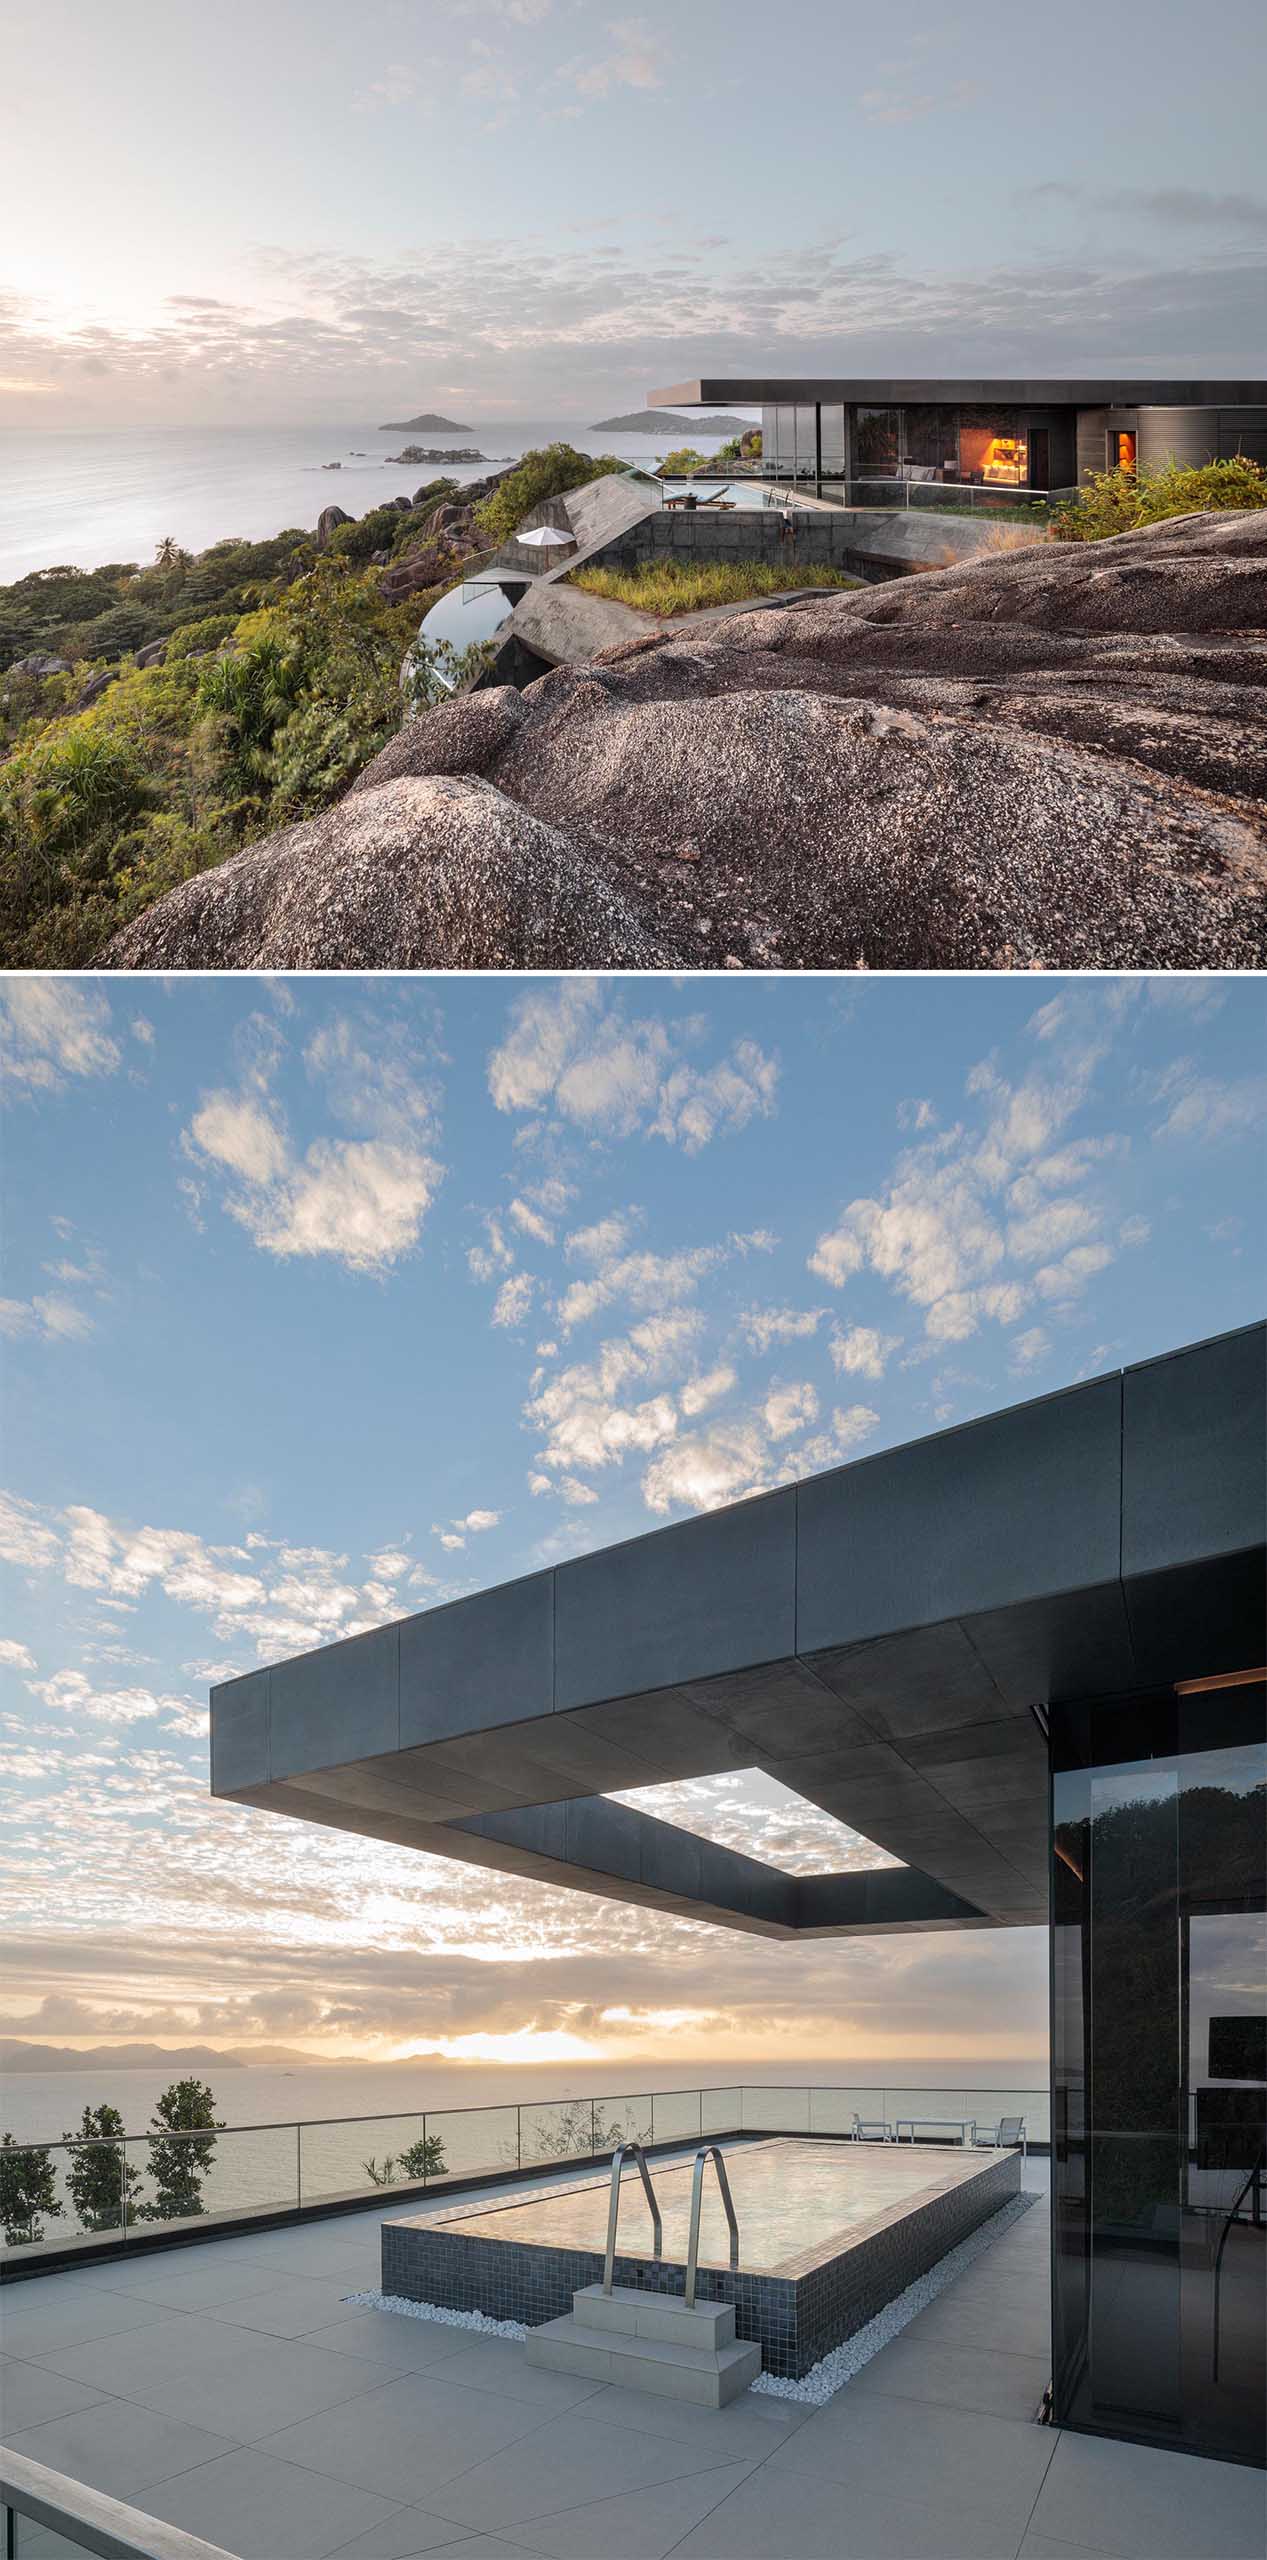 These modern houses are clad in black granite to complement the surrounding rock forms, and are designed in such a way that they capture the wind, using a ‘venturi’ effect to provide natural cooling.